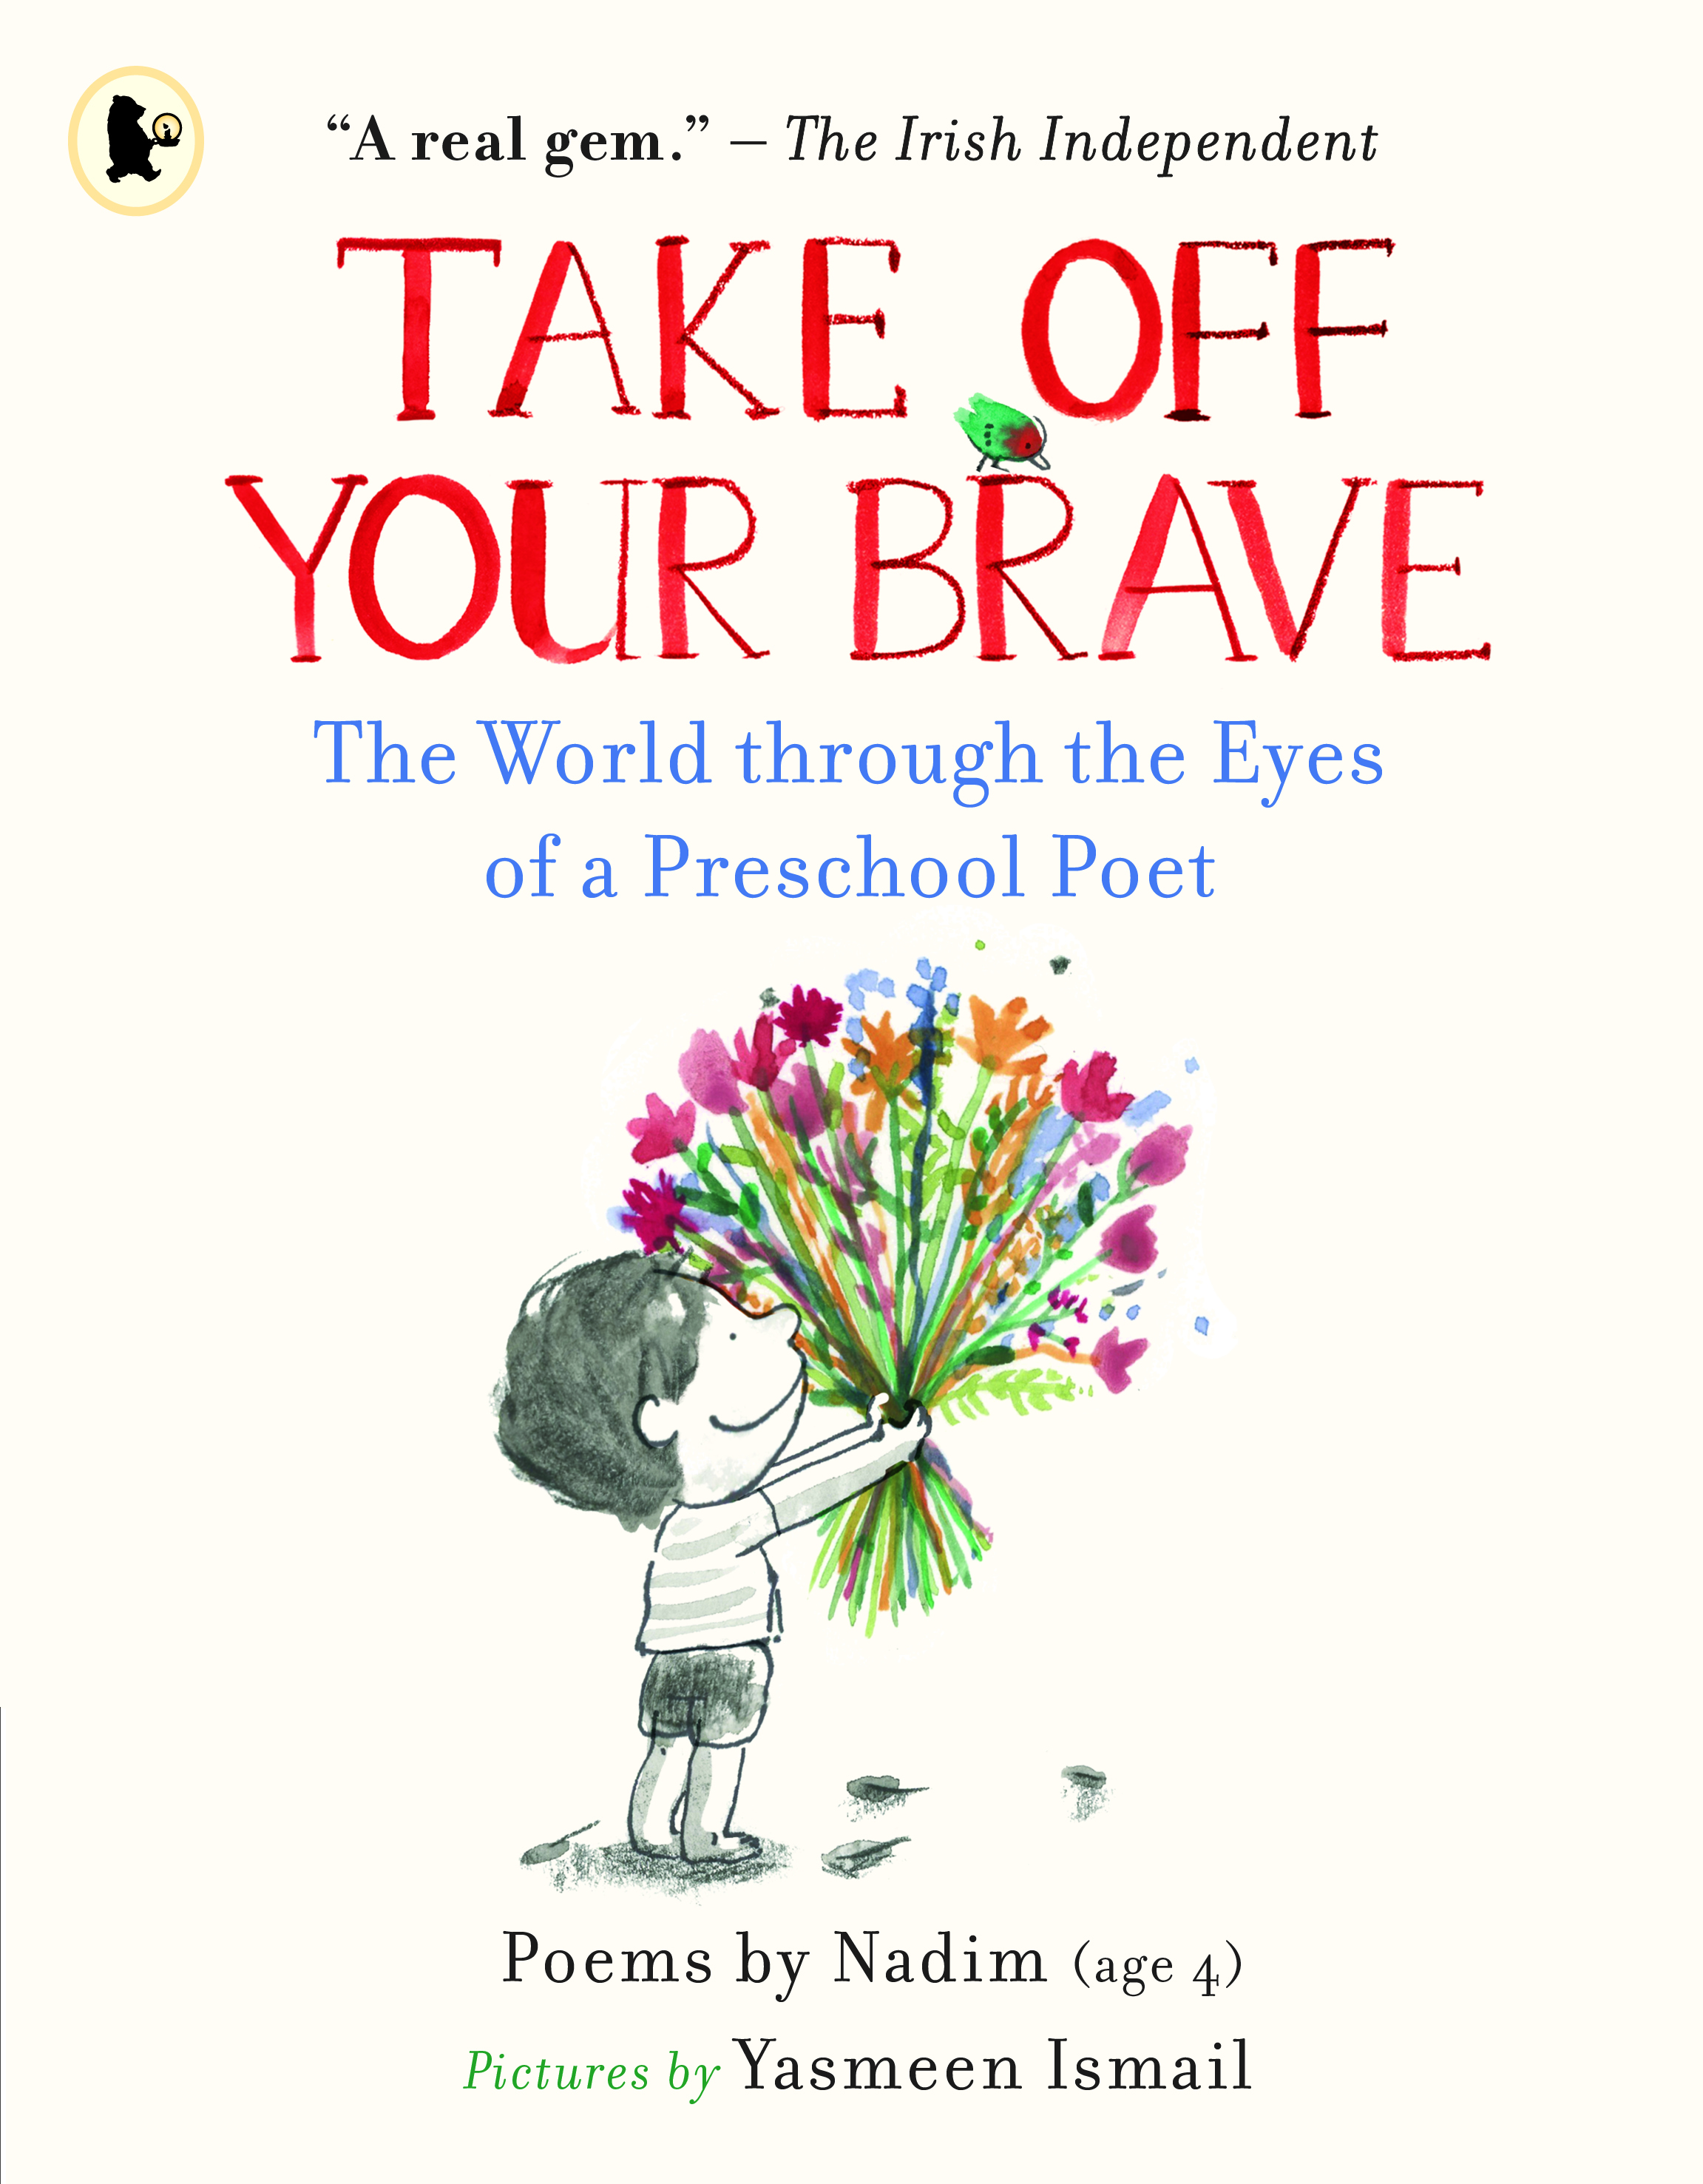 Take-Off-Your-Brave-The-World-through-the-Eyes-of-a-Preschool-Poet